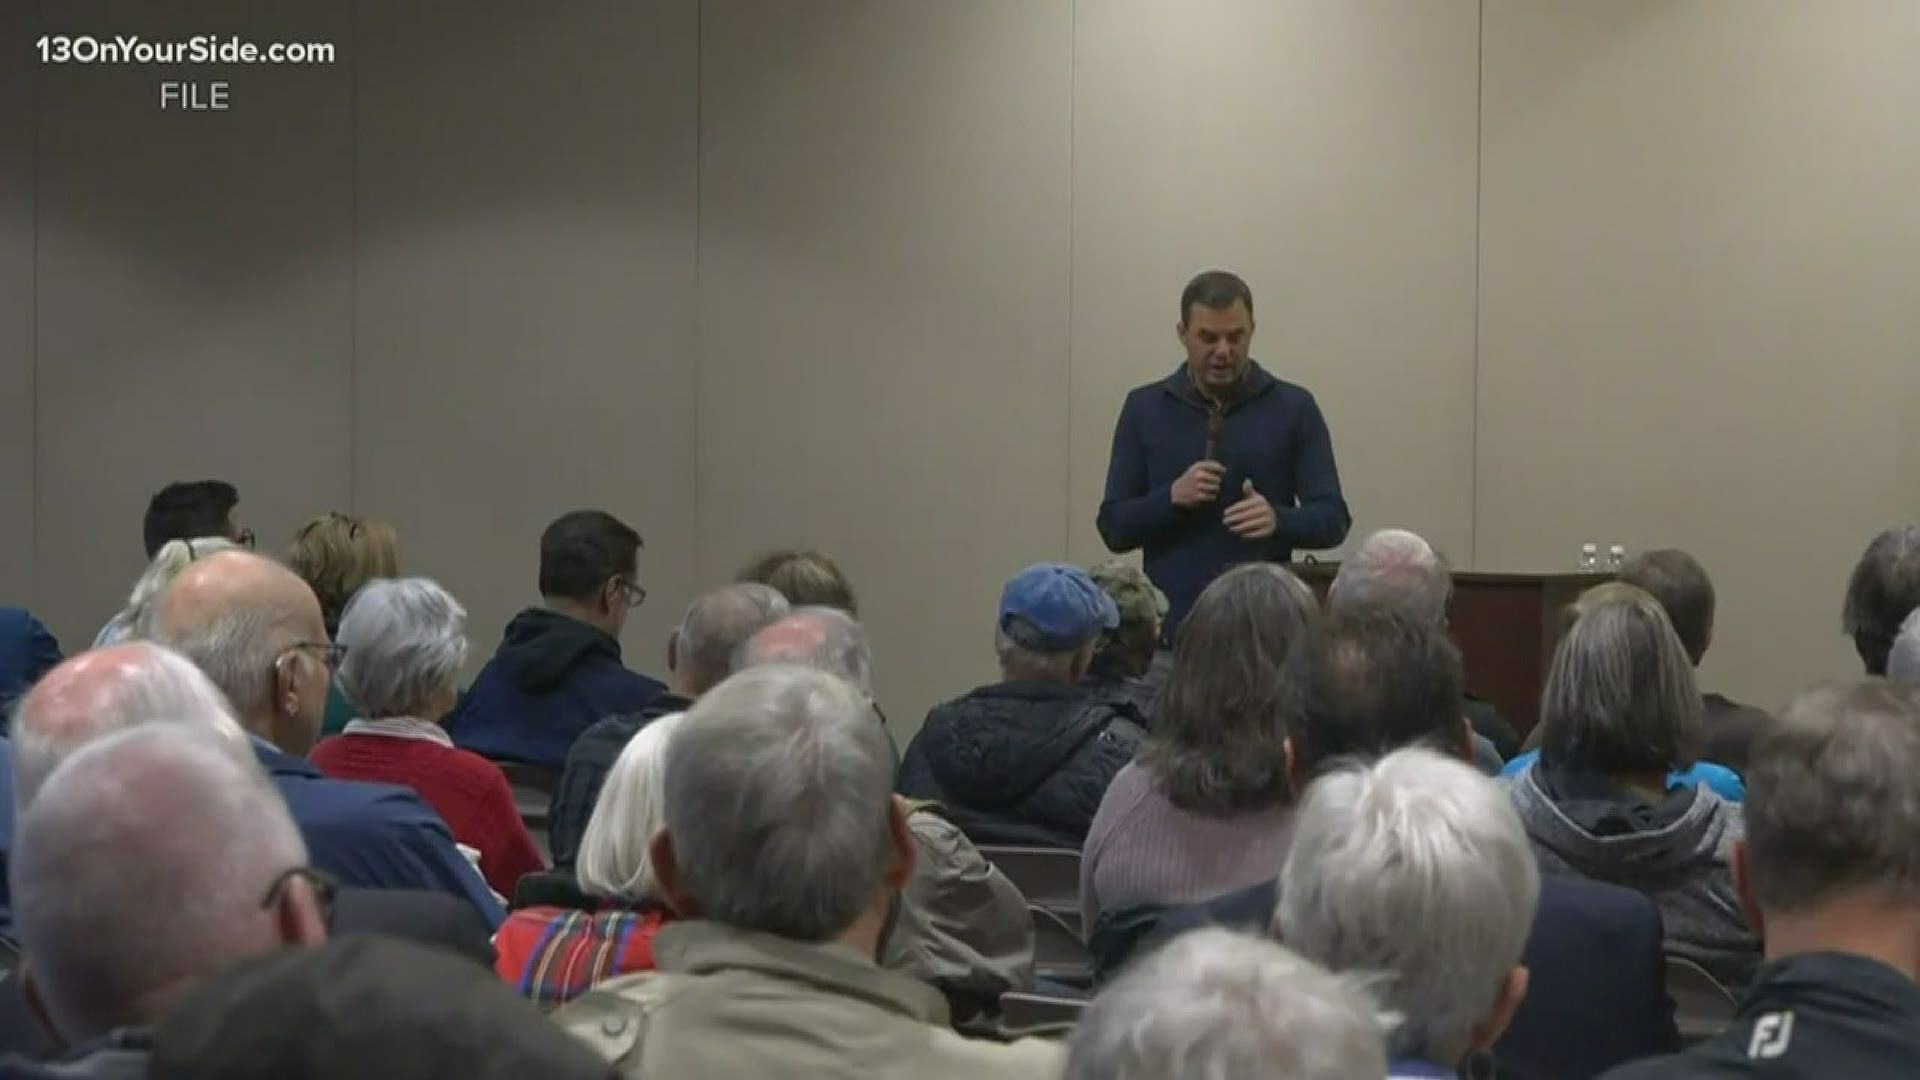 U.S. Rep. Justin Amash indicated he is considering a third-party candidacy for the White House.